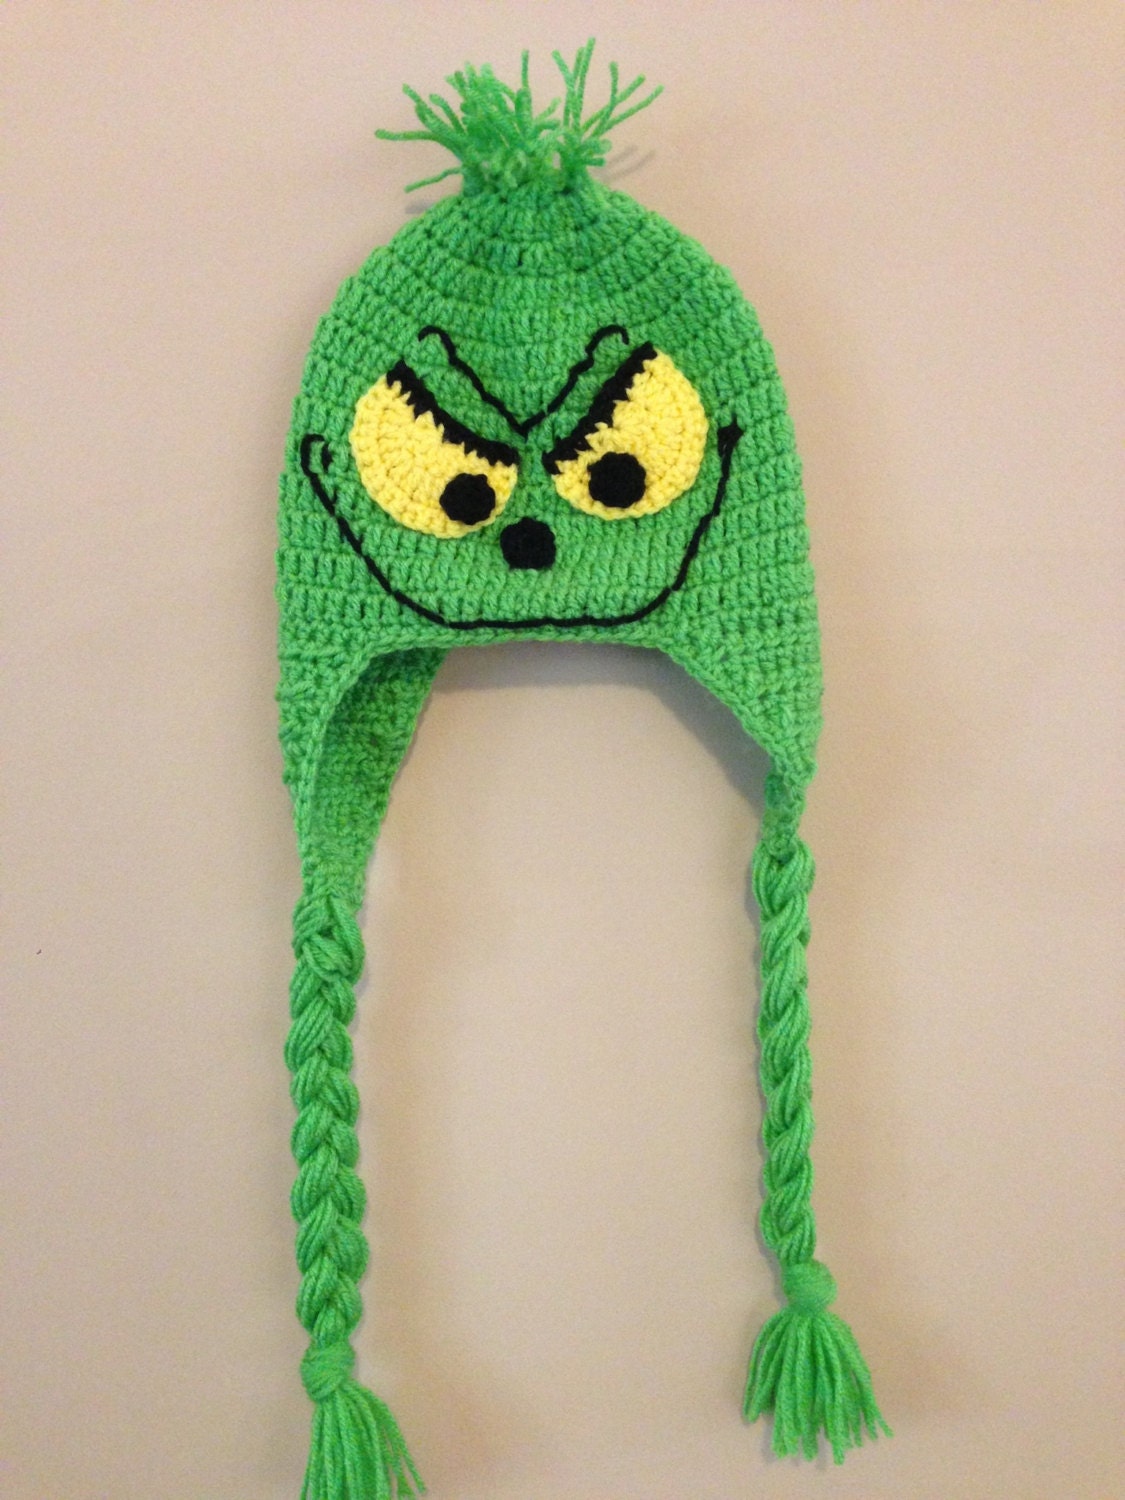 Crochet Grinch Hat by DoubleCrocheted on Etsy